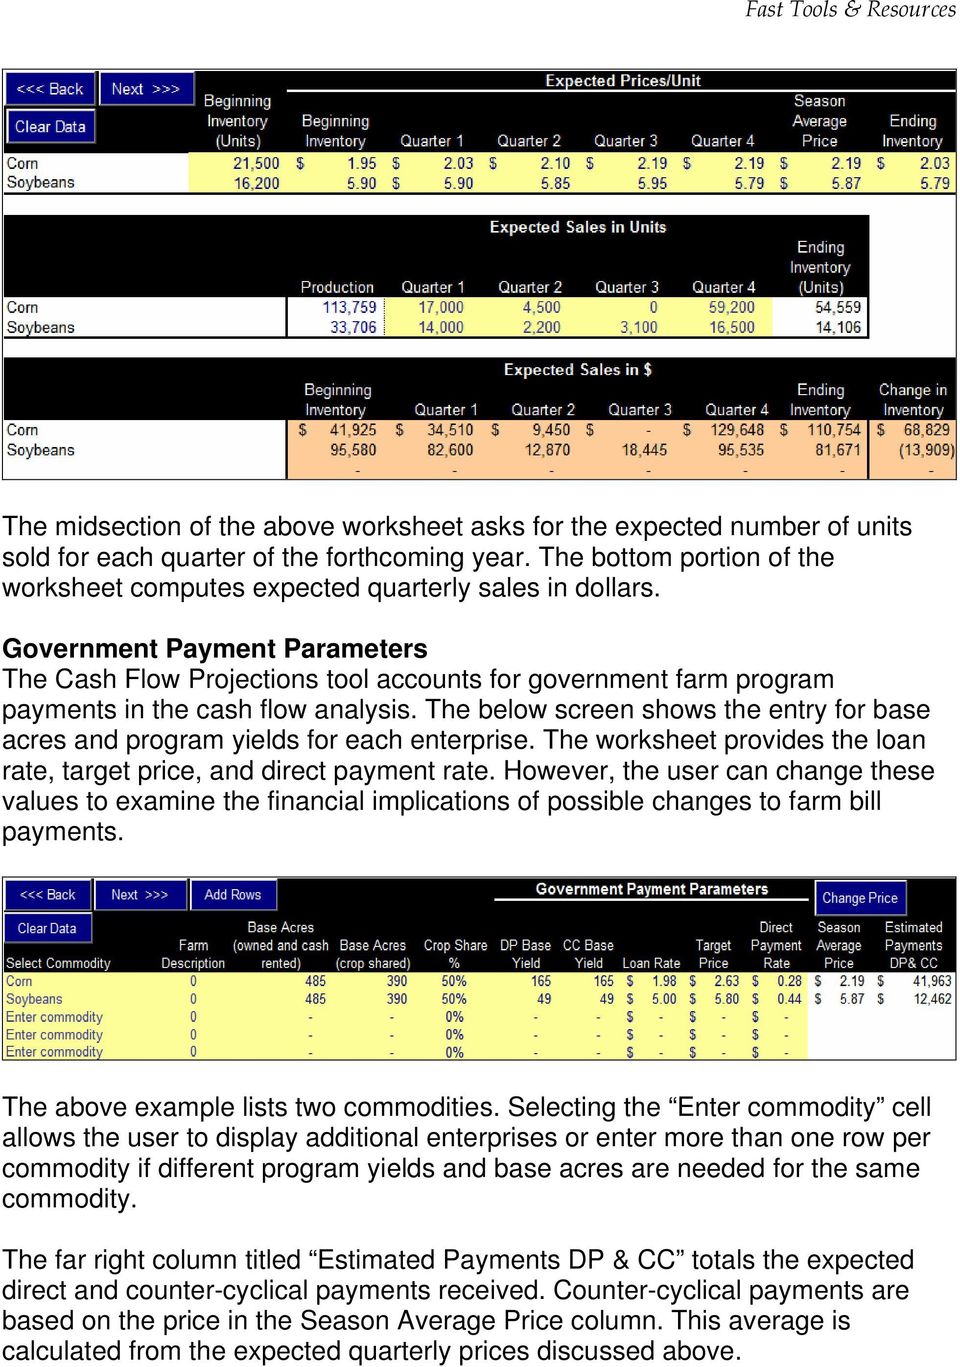 Government Payment Parameters The Cash Flow Projections tool accounts for government farm program payments in the cash flow analysis.